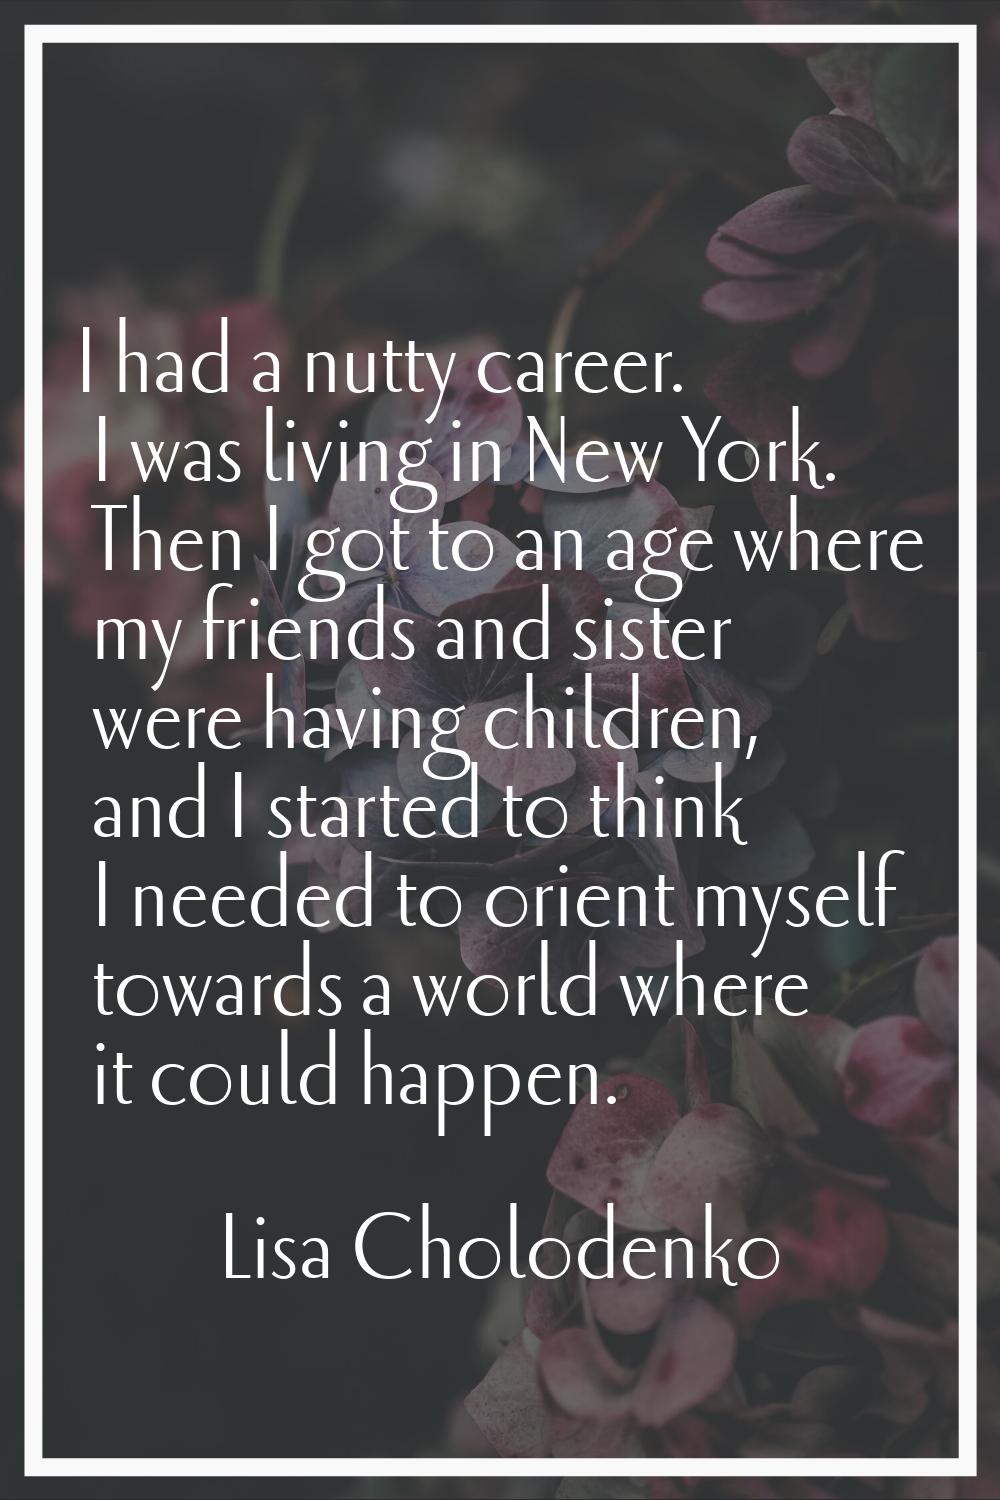 I had a nutty career. I was living in New York. Then I got to an age where my friends and sister we